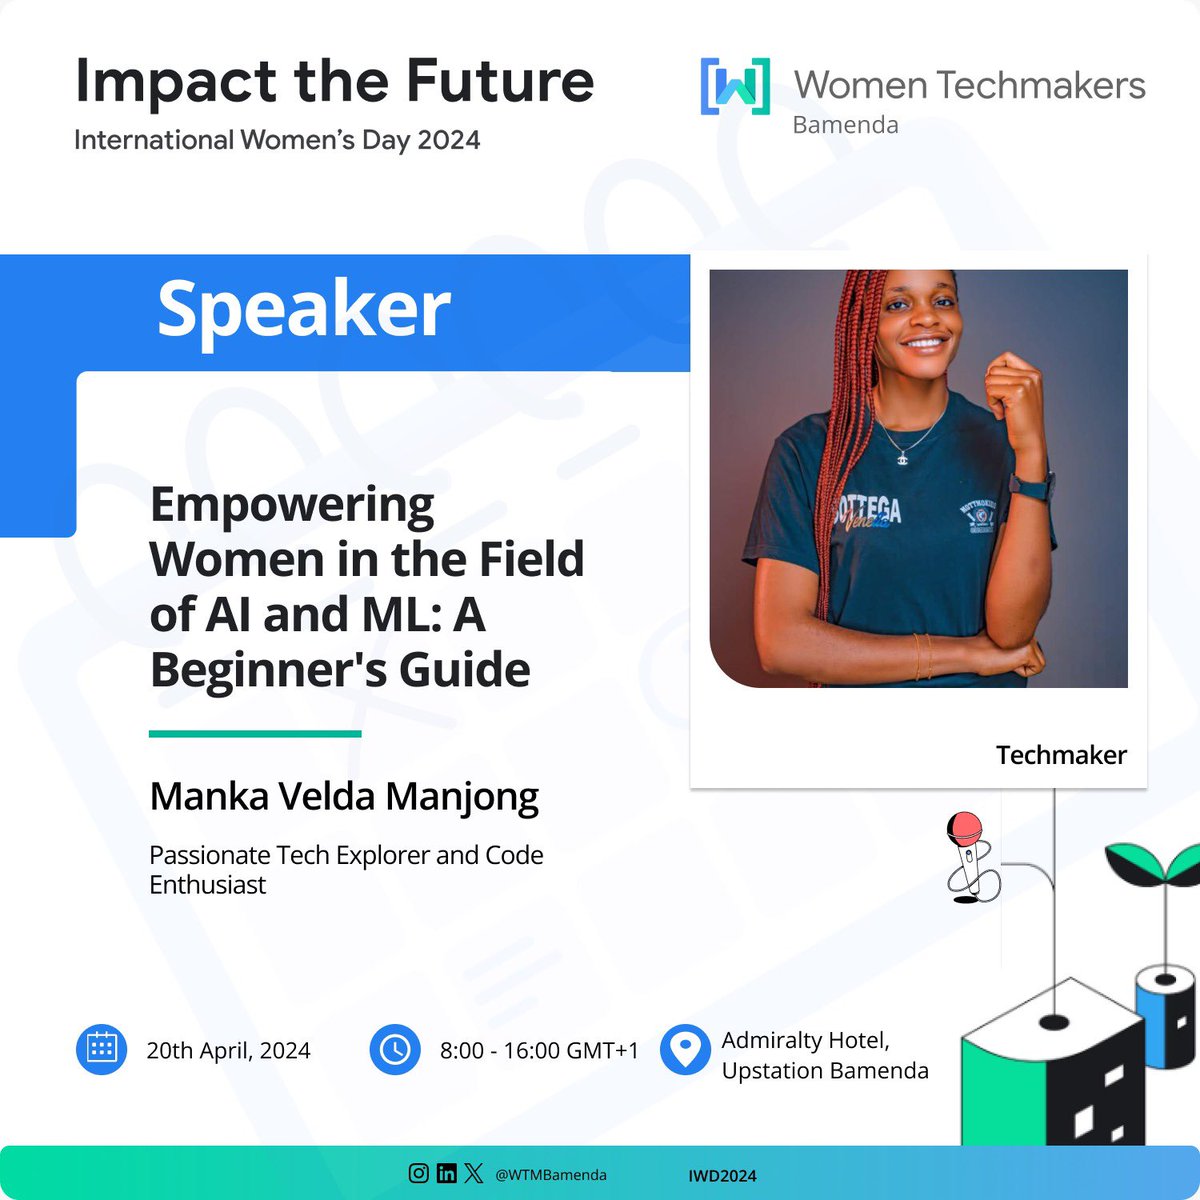 Meet our 2nd speaker - @MankaVelda a Passionate Tech Explorer

Talk Title: Empowering Women in the field of AI & ML

RSVP: bit.ly/WTMBamenda-IWD…

📅 20th April 2024
🏢 Admiralty Hotel Upstation
🕰️ 8:00am

#WTMBamenda
#WTMBamendaIWD
#IWD2024
#Impactthefuture
#WTMImpacttheFuture